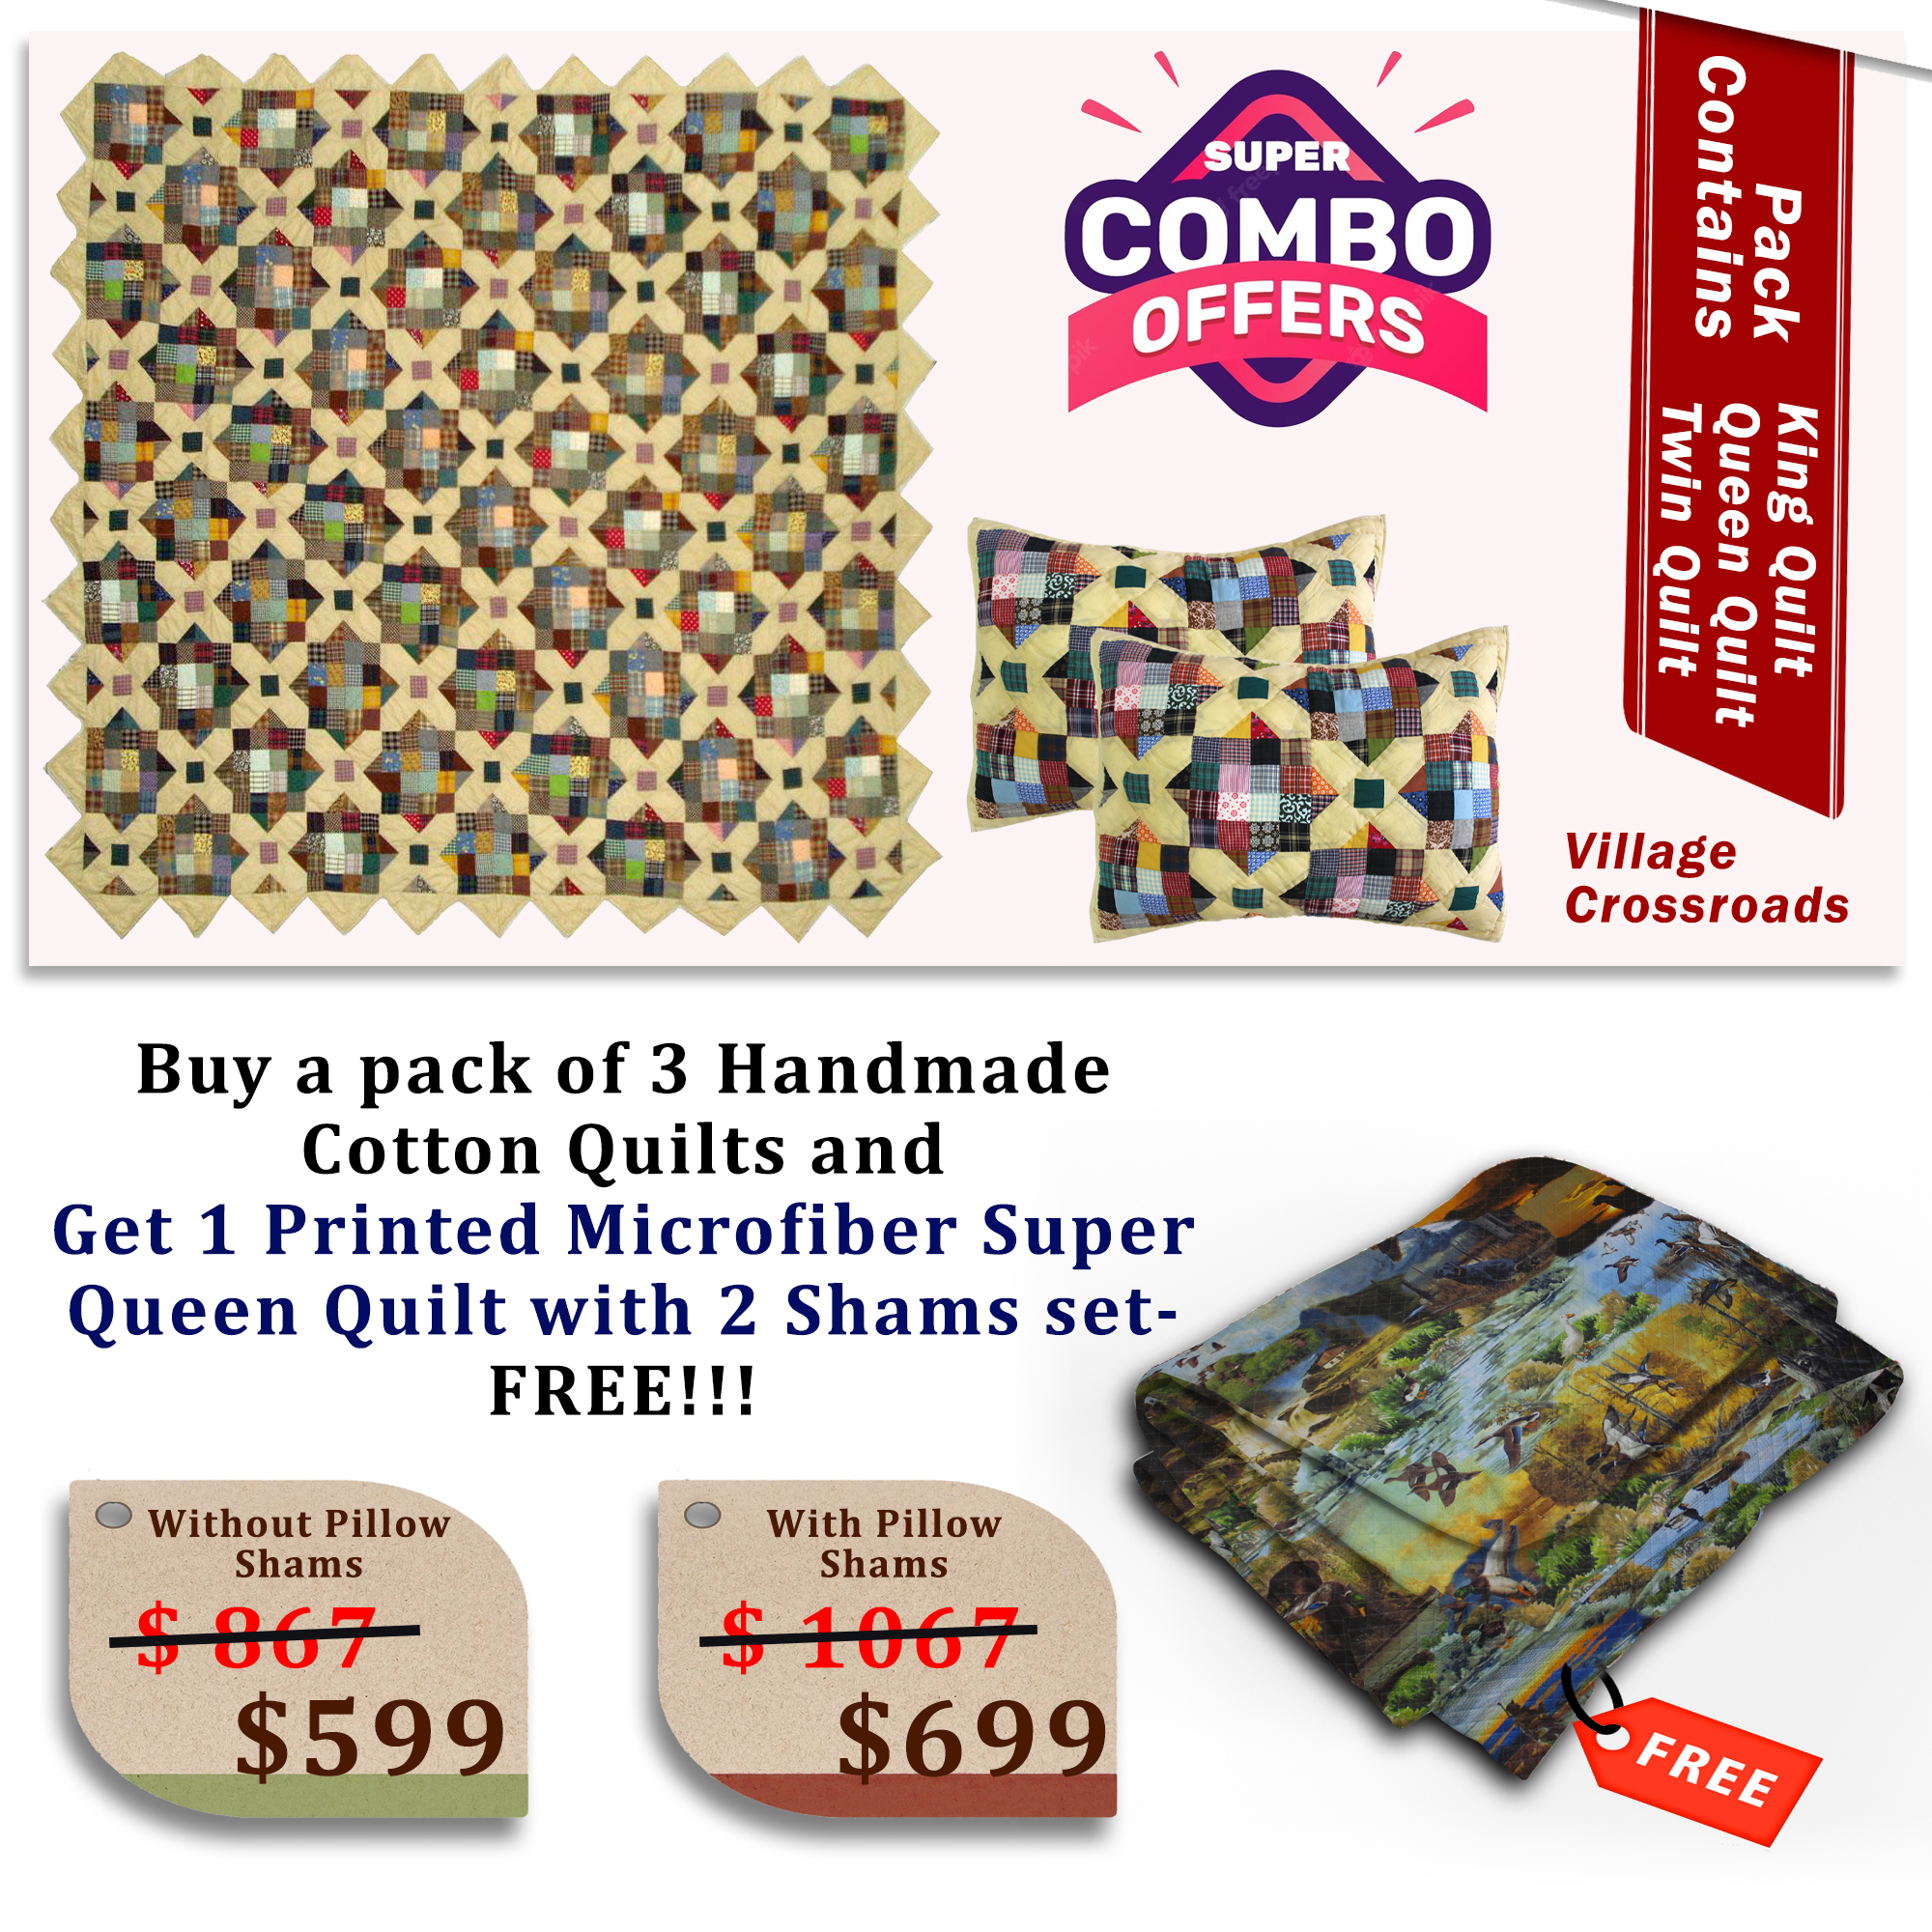 Village Crossroads - Handmade Cotton quilts | Buy 3 cotton quilts and get 1 Printed Microfiber Super Queen Quilt with 2 Shams set FREE